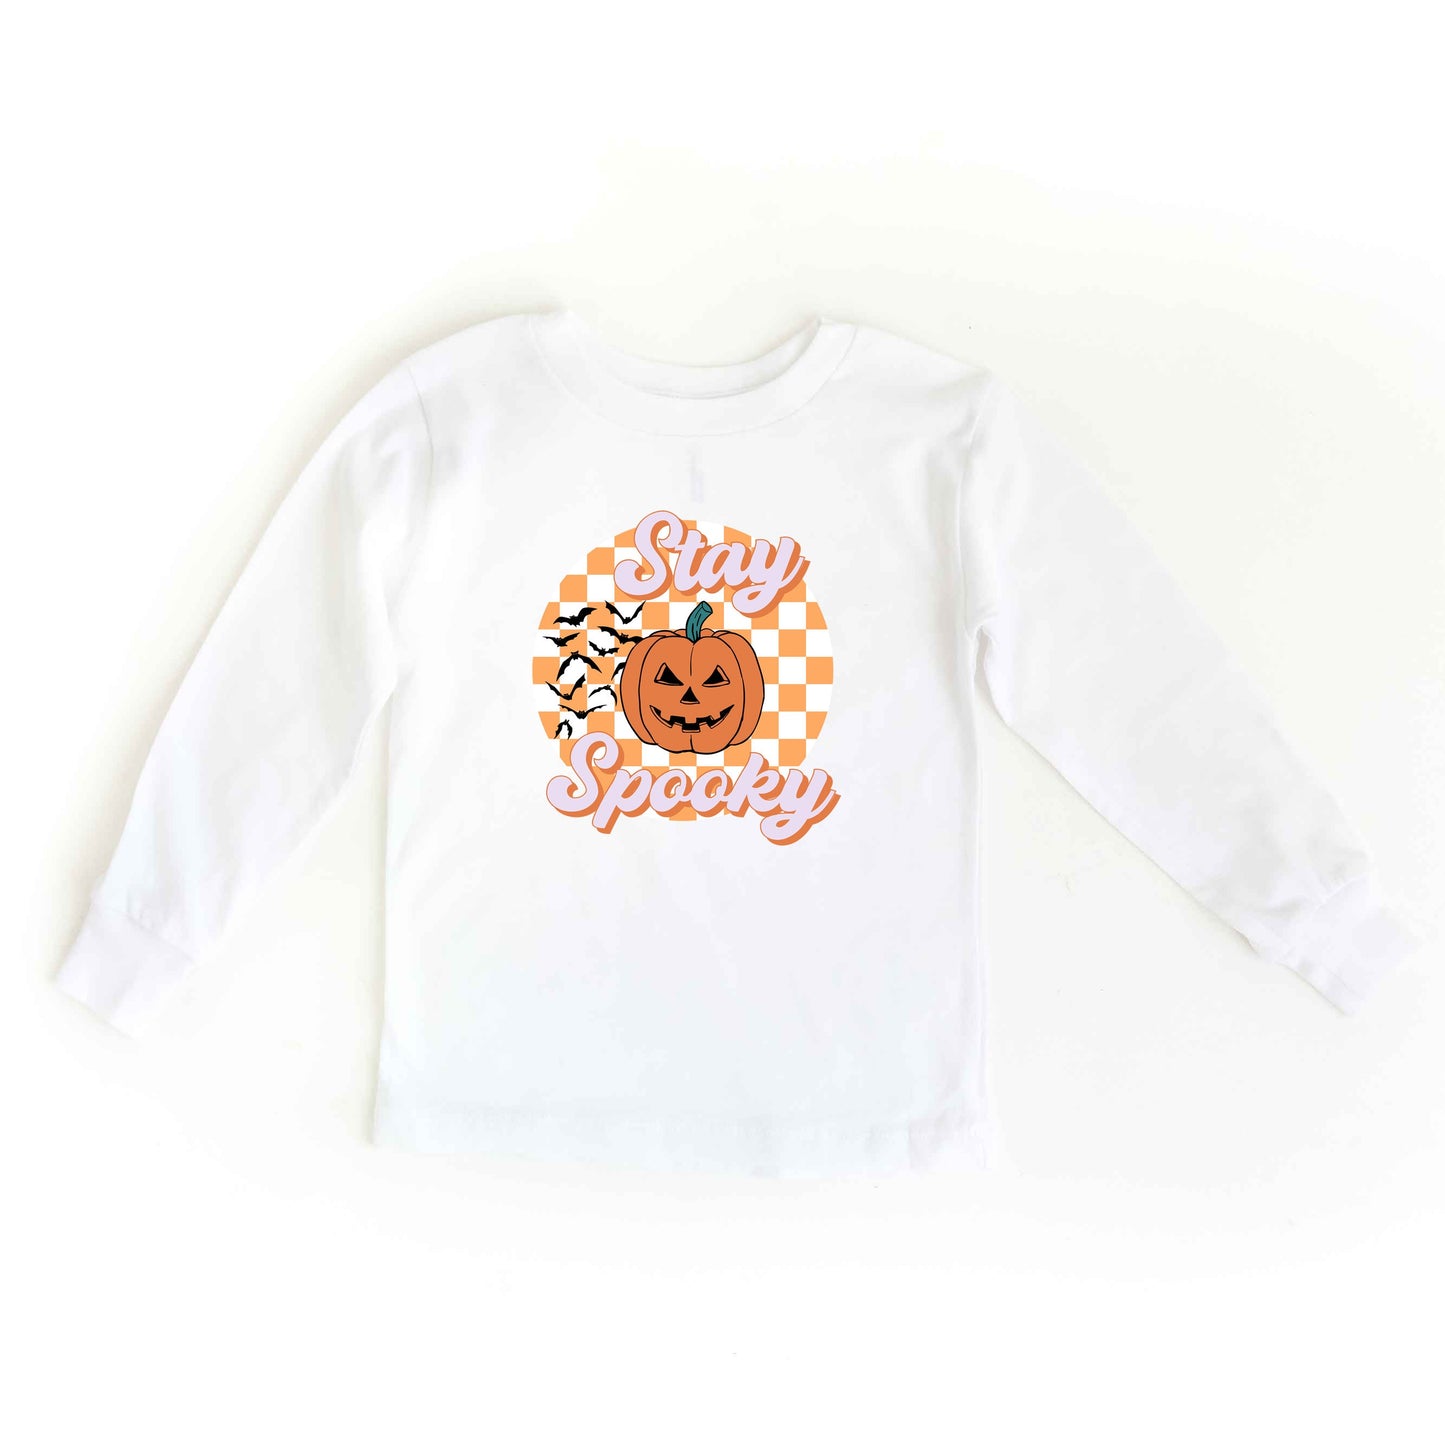 Stay Spooky Bats Checkered | Toddler Graphic Long Sleeve Tee